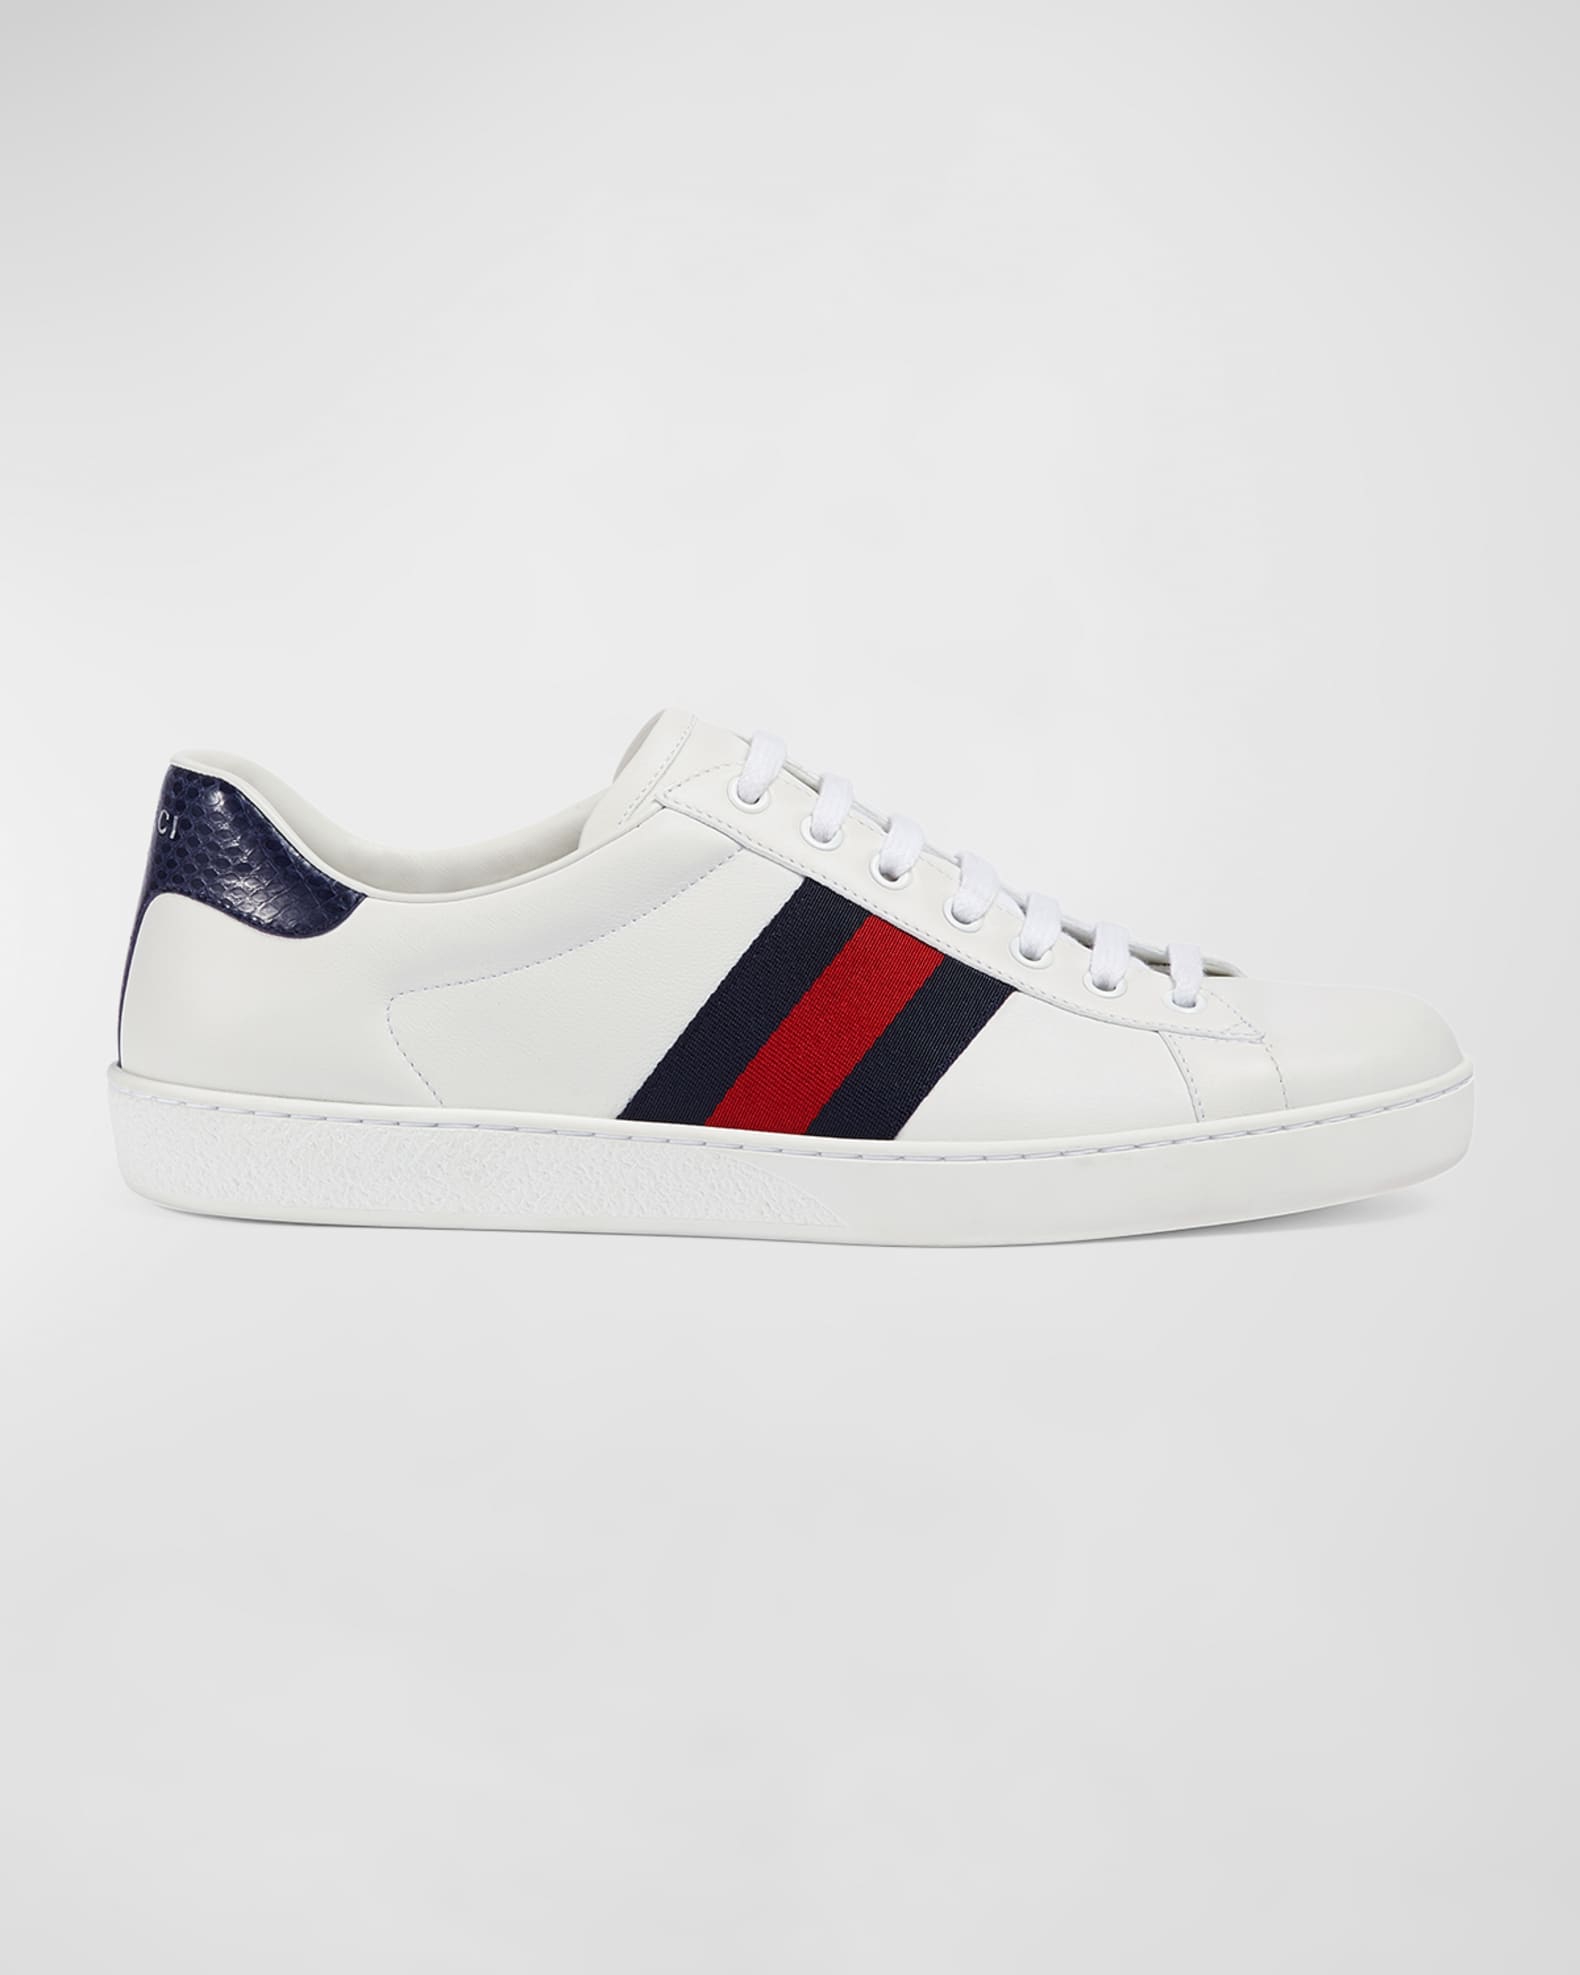 Gucci New Ace Leather Sneakers Neiman Marcus